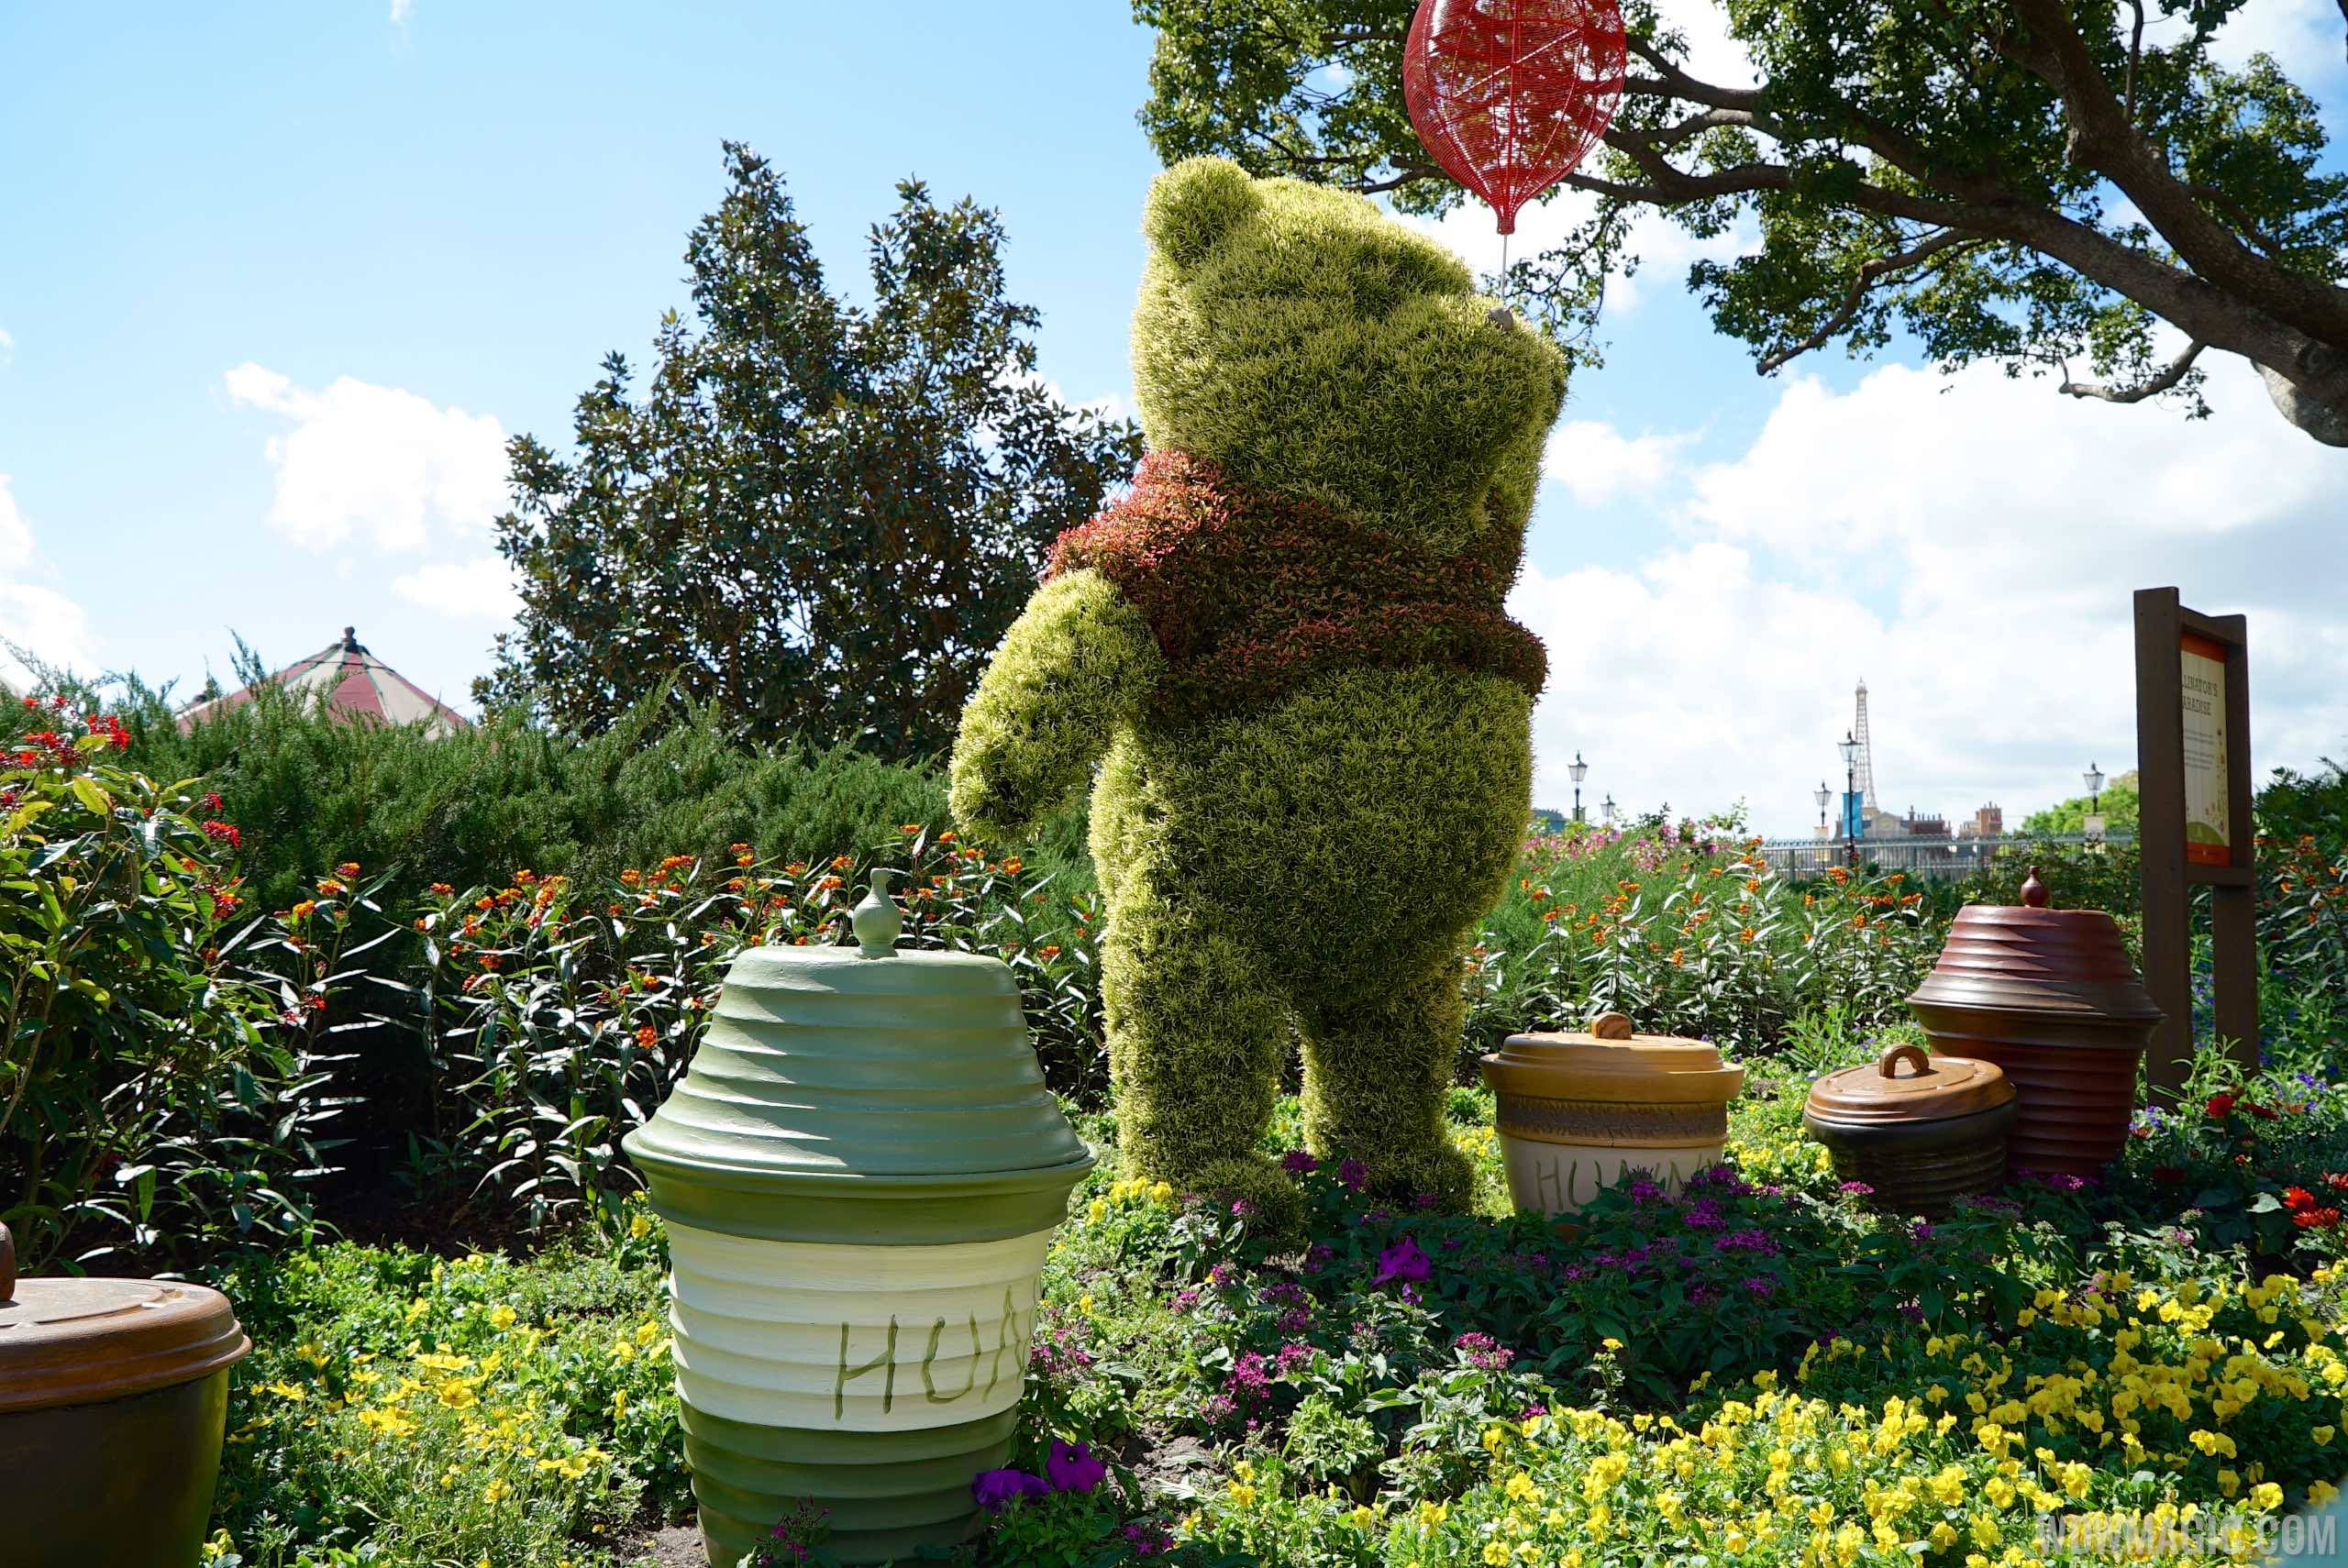 2015 Epcot Flower and Garden Festival - Pooh topiary at the UK